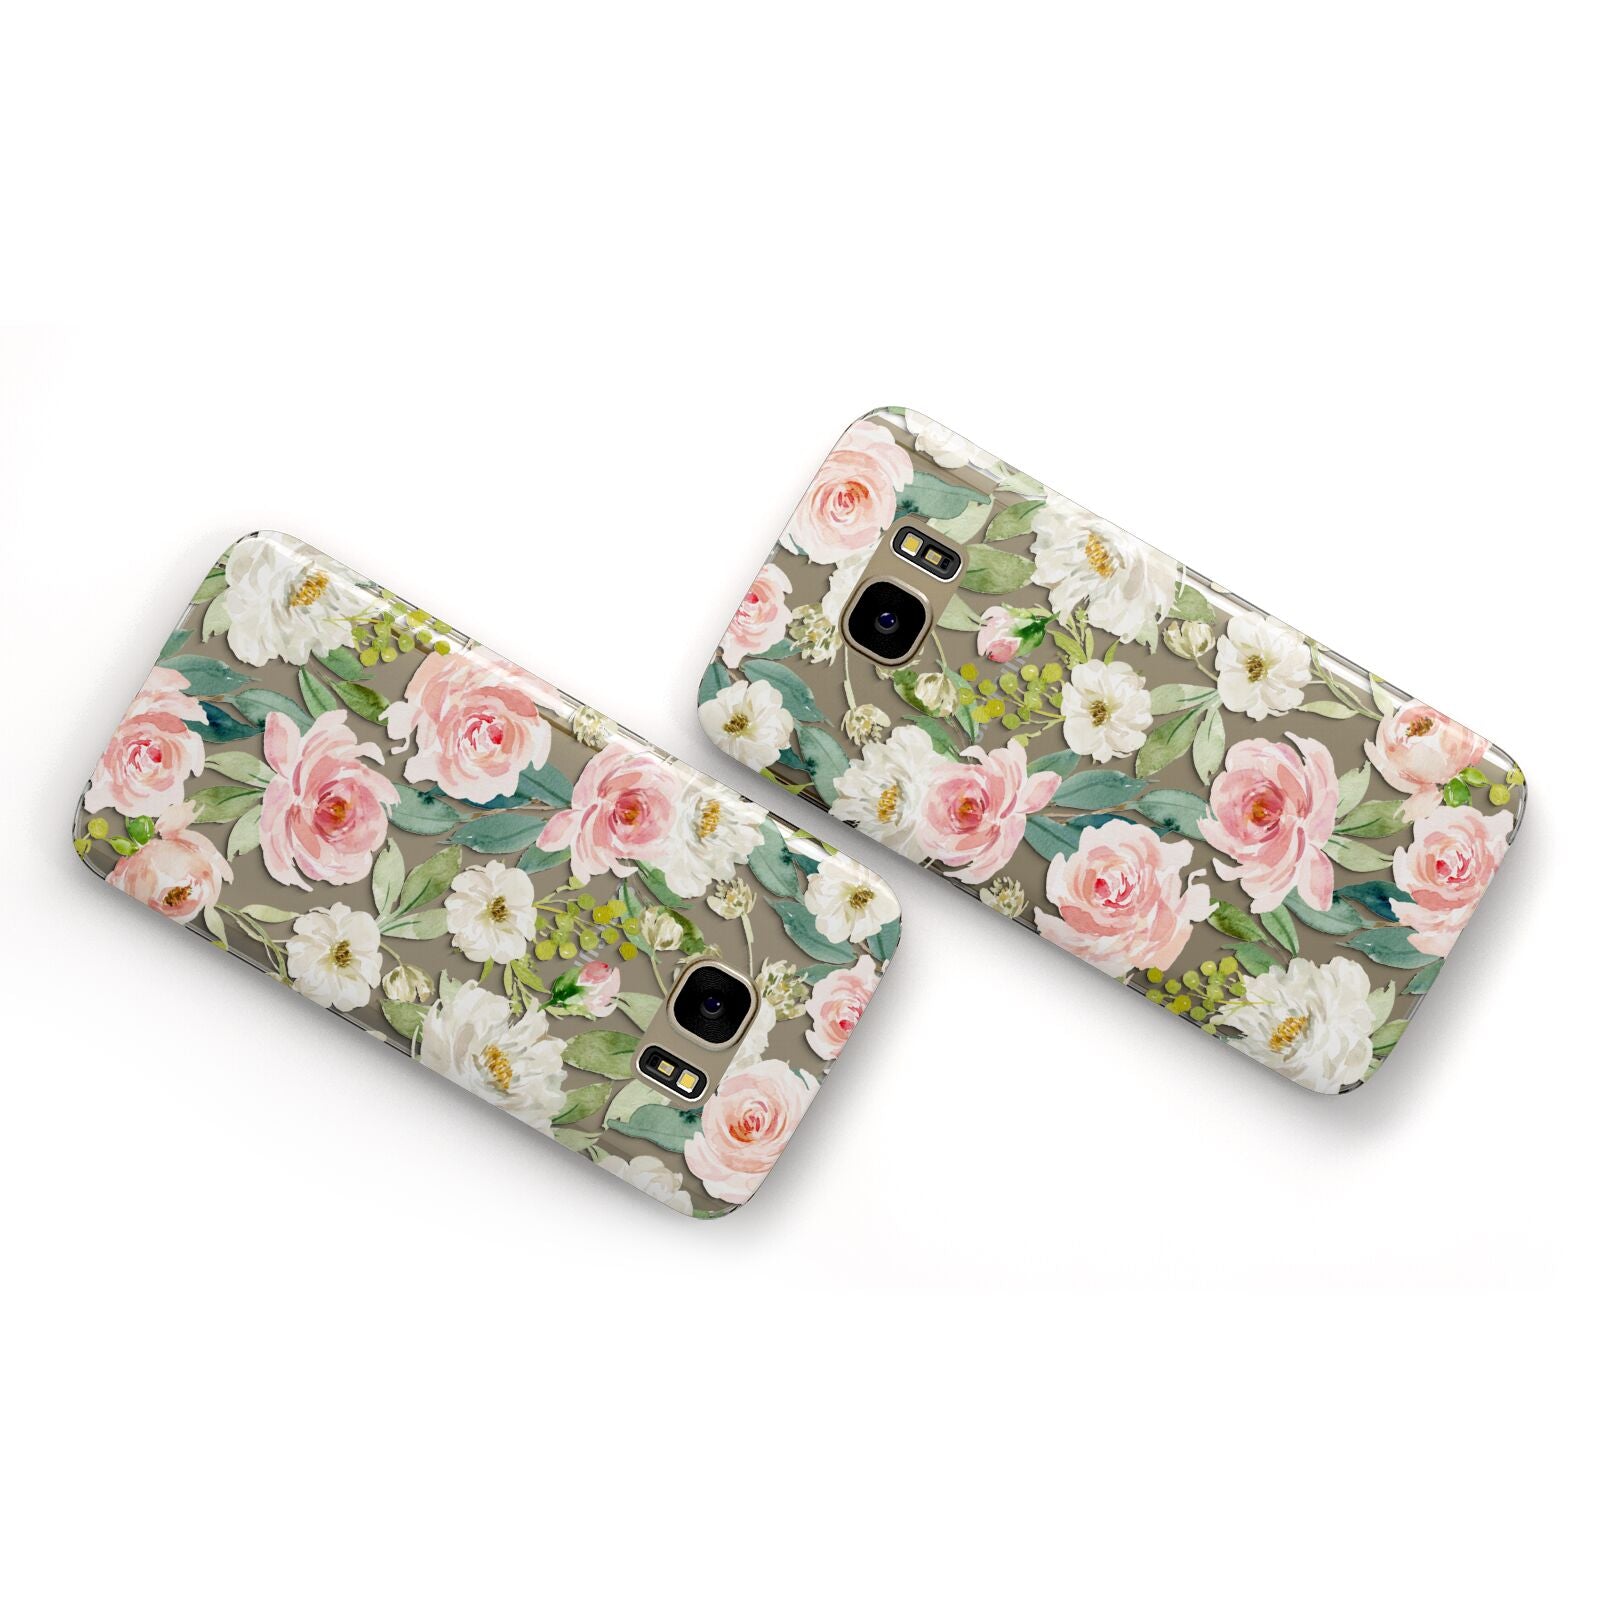 Watercolour Peonies Roses and Foliage Samsung Galaxy Case Flat Overview